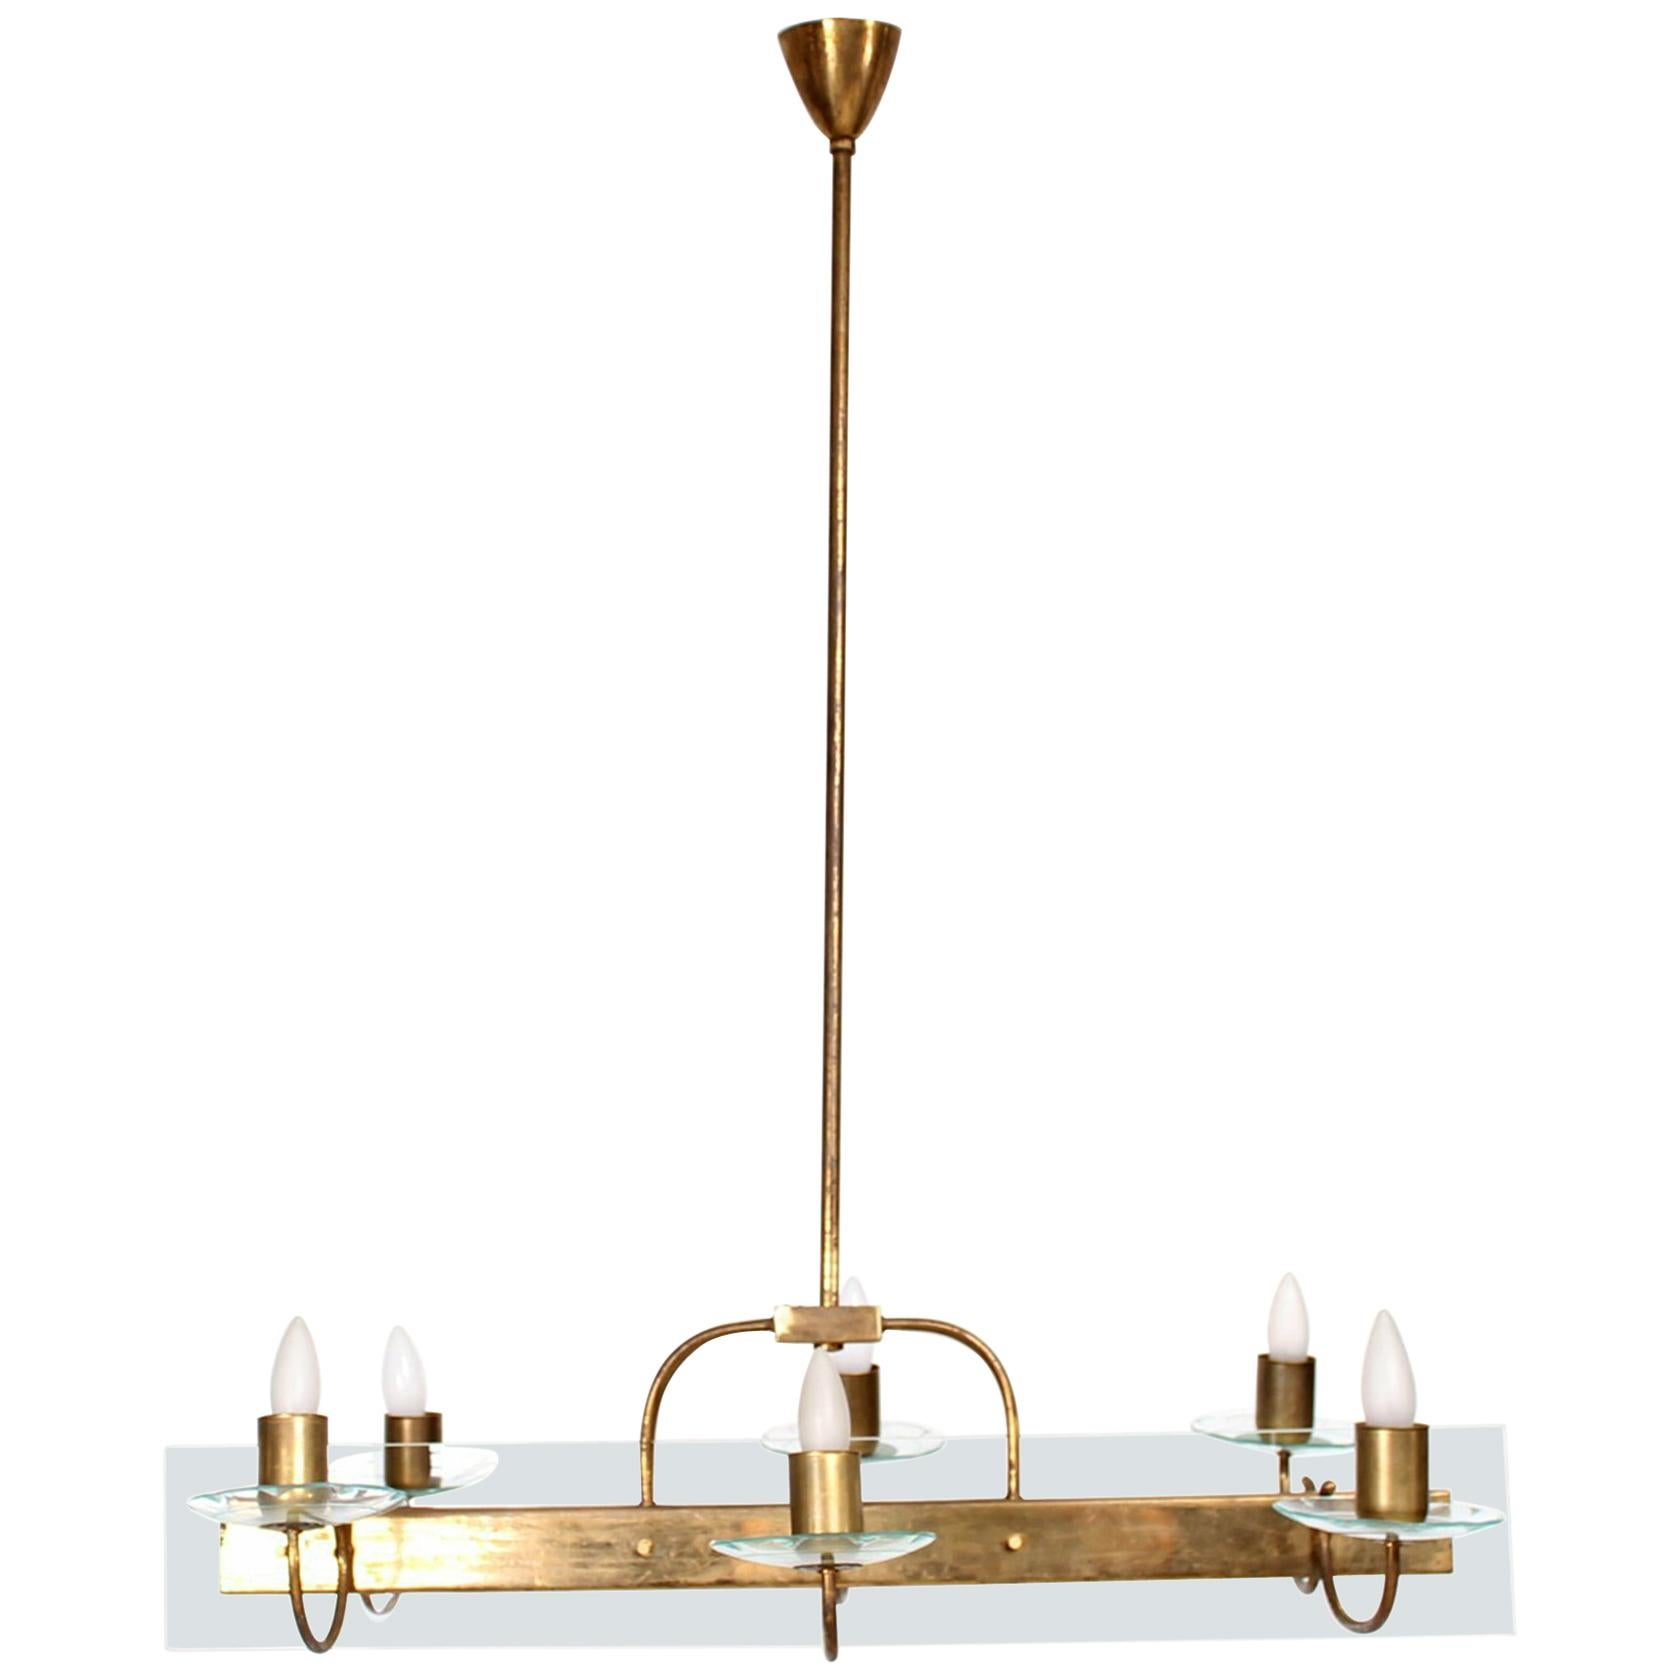 Fabulous Floating Six Arm Italian Chandelier attributed to Fontana Arte.
Midcentury Modern elegance 1950s Italy.
No maker remains.
Bold Brass Construction with Pristine Glass Accents (cut by hand).
Three arms per side. Requiring six E-14 bulbs (not